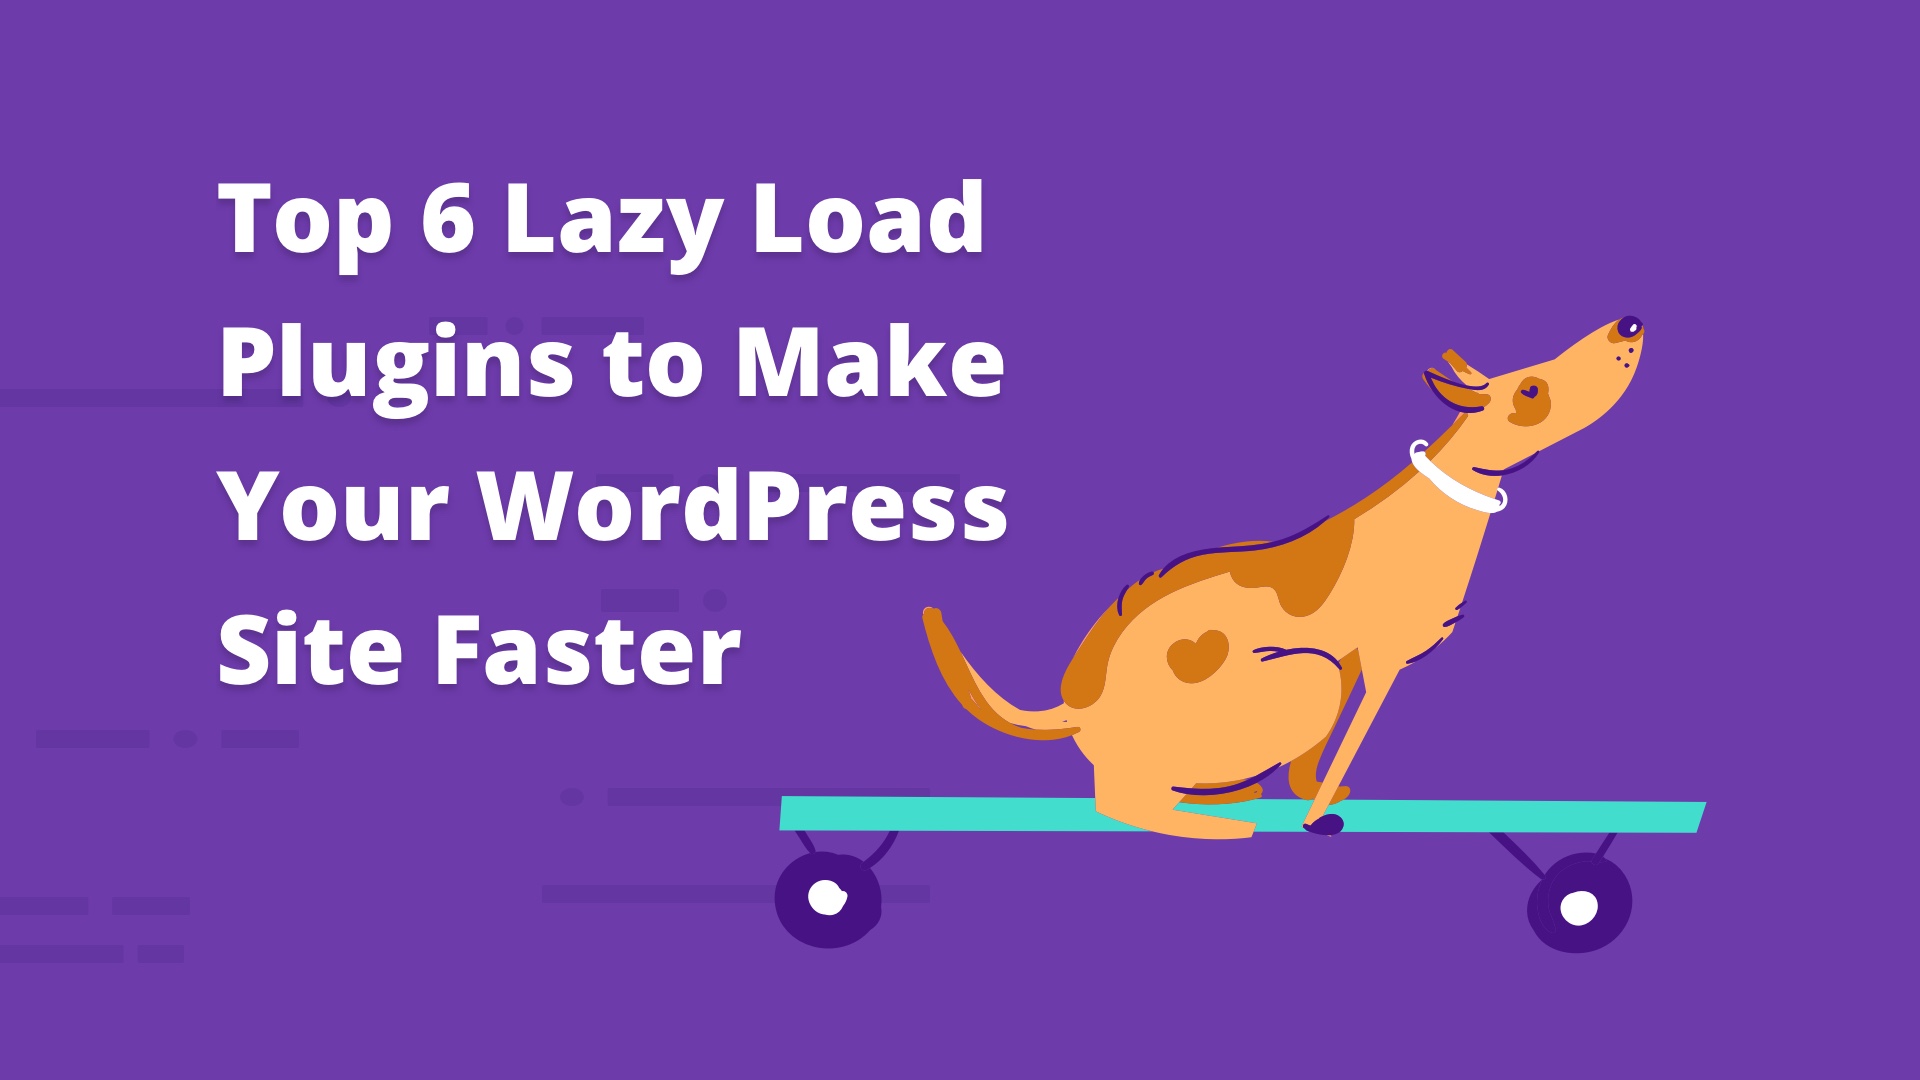 Top 6 Lazy Load Plugins to Make Your WordPress Site Faster